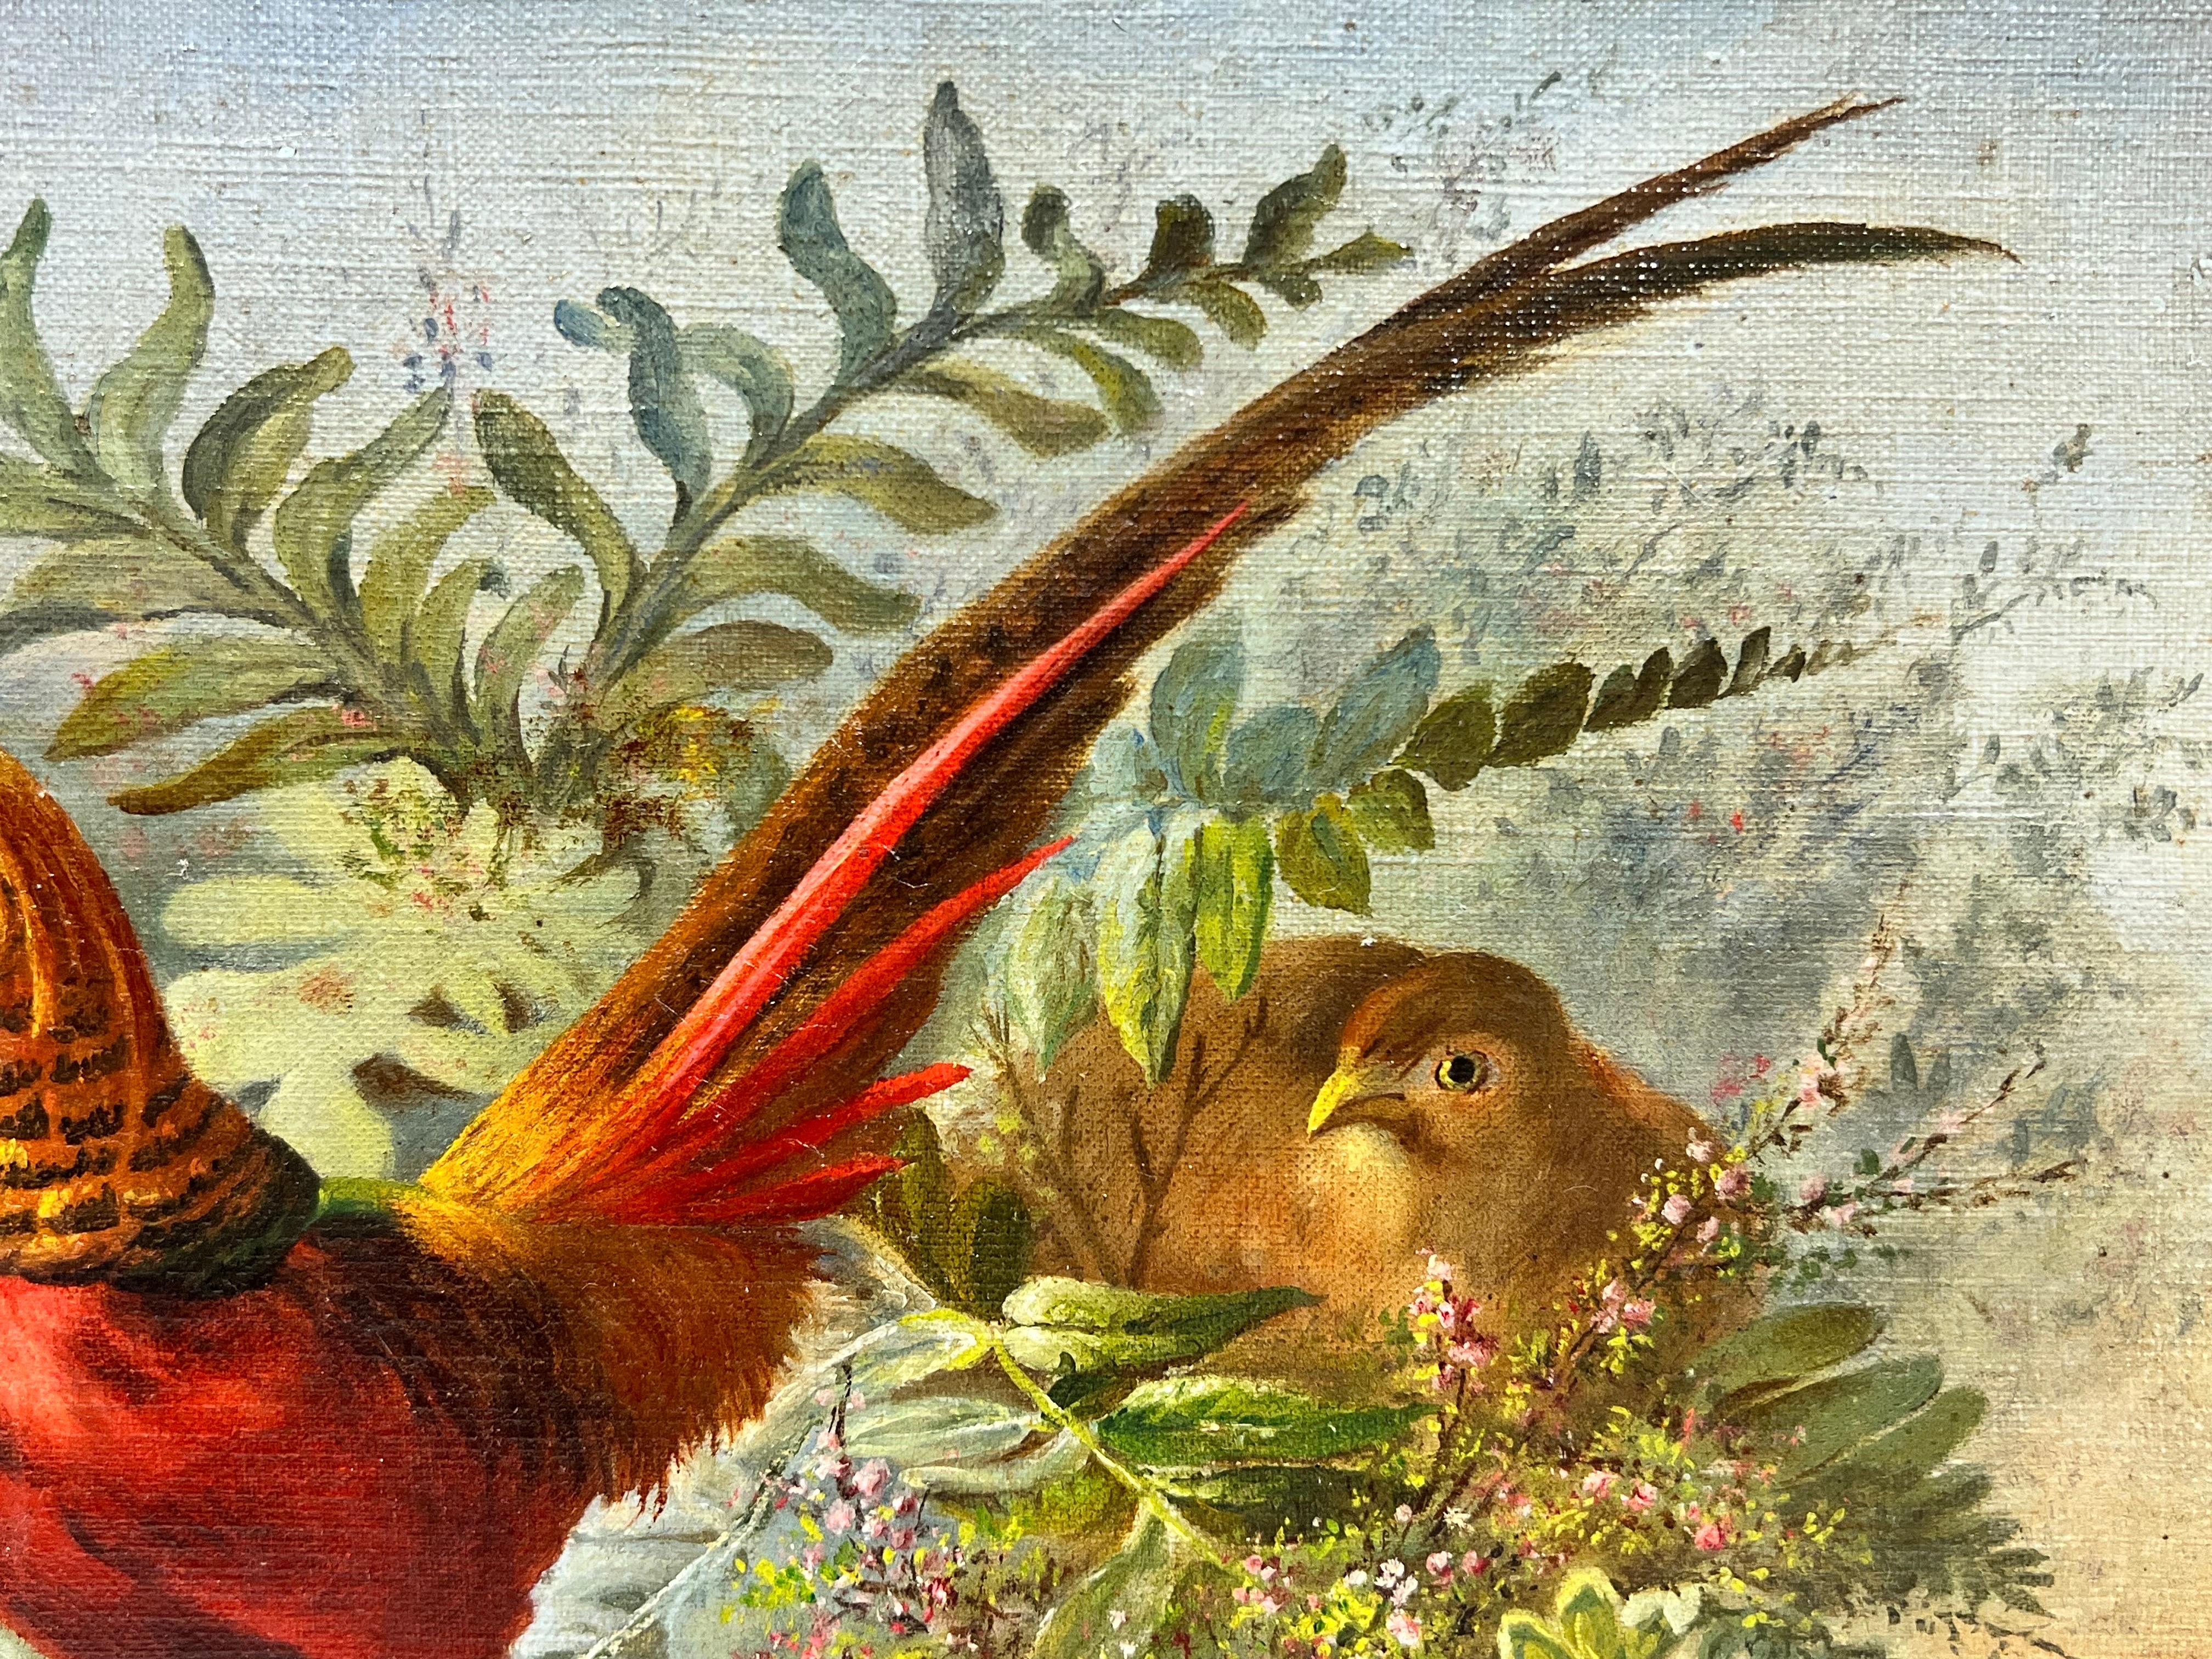 Exotic Pheasants in Landscape 
Beautifully rich and warm colors, ideal interior design 

French School, 19th century 
oil painting on canvas, unframed
painting: 9 x 10.5  inches
provenance: private collection, France 
condition: overall very good